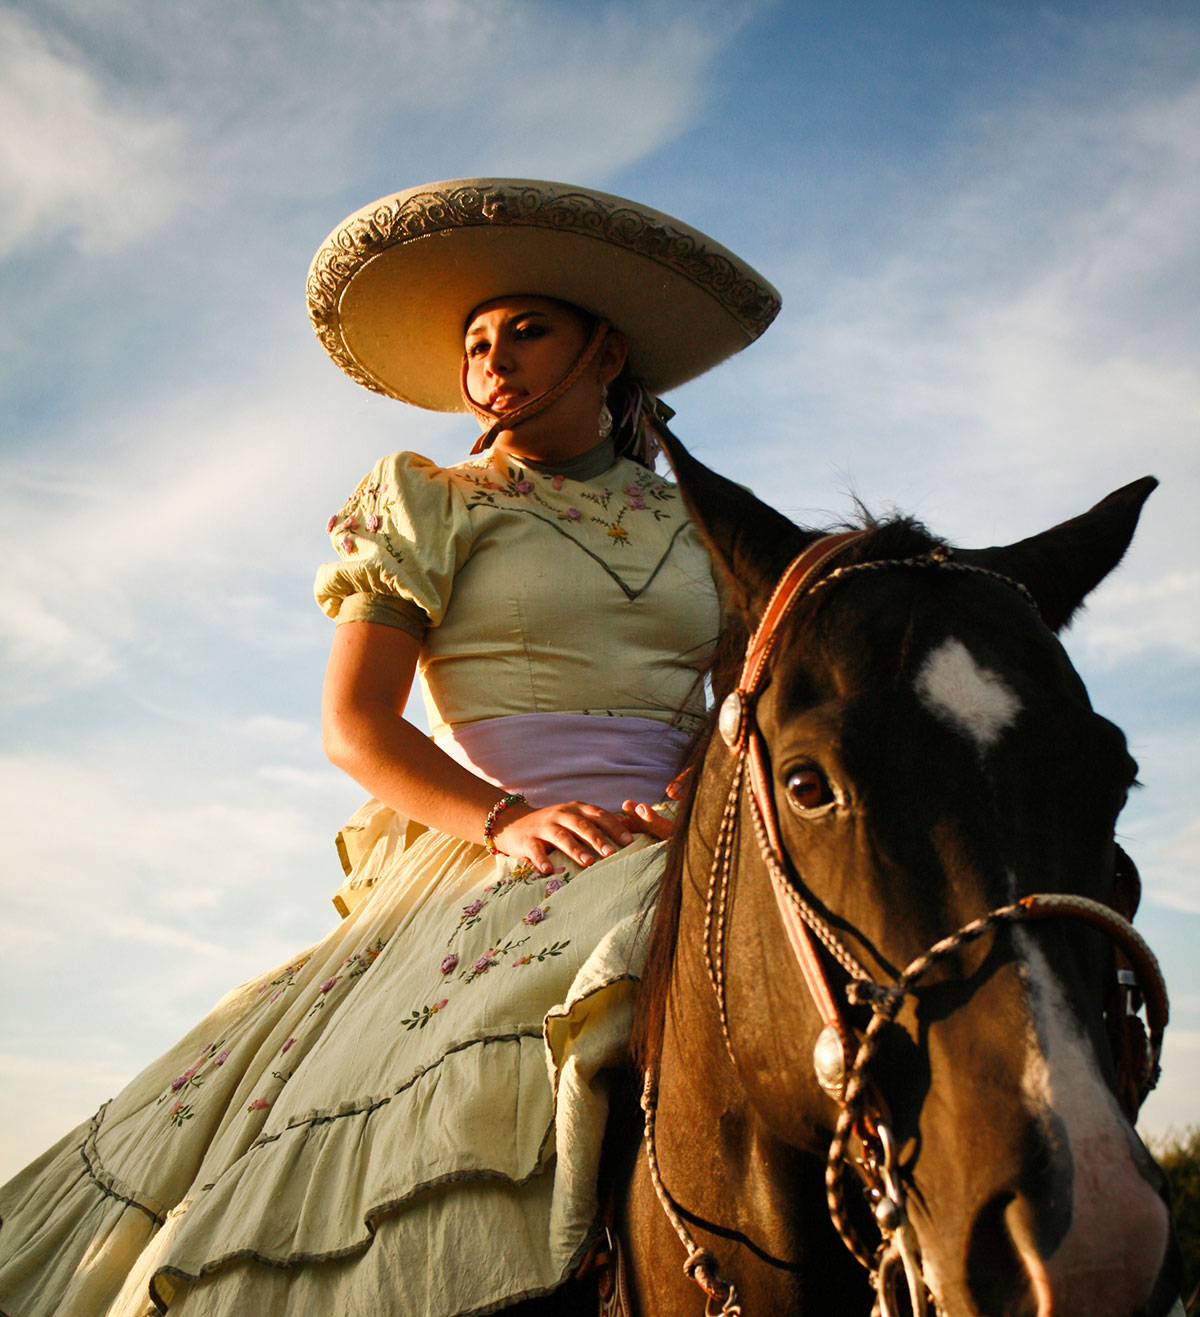 Made In Mexico - 9 Things You Didn’t Know about Mexican Culture